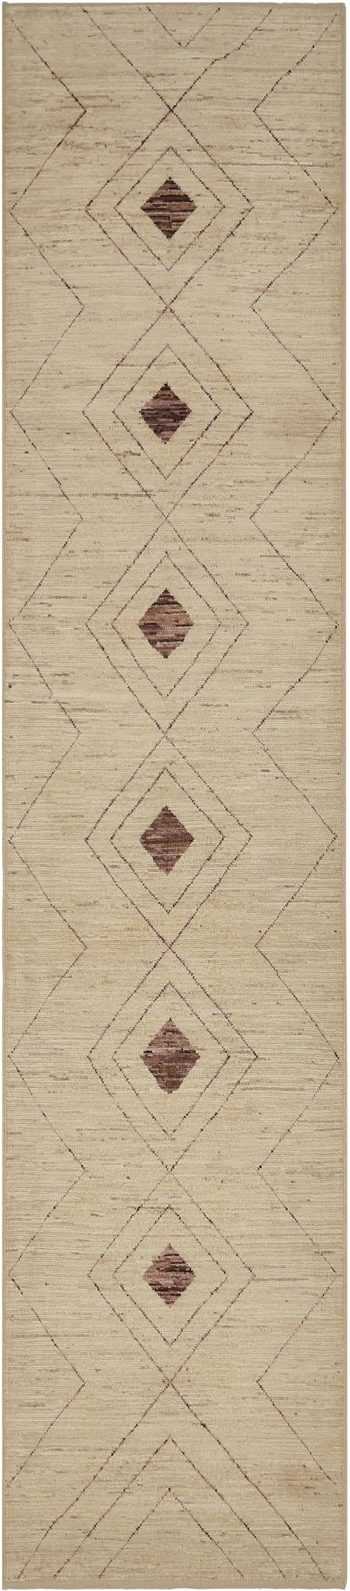 Beige and Brown Modern Moroccan Style Runner Rug 60333 by Nazmiyal NYC